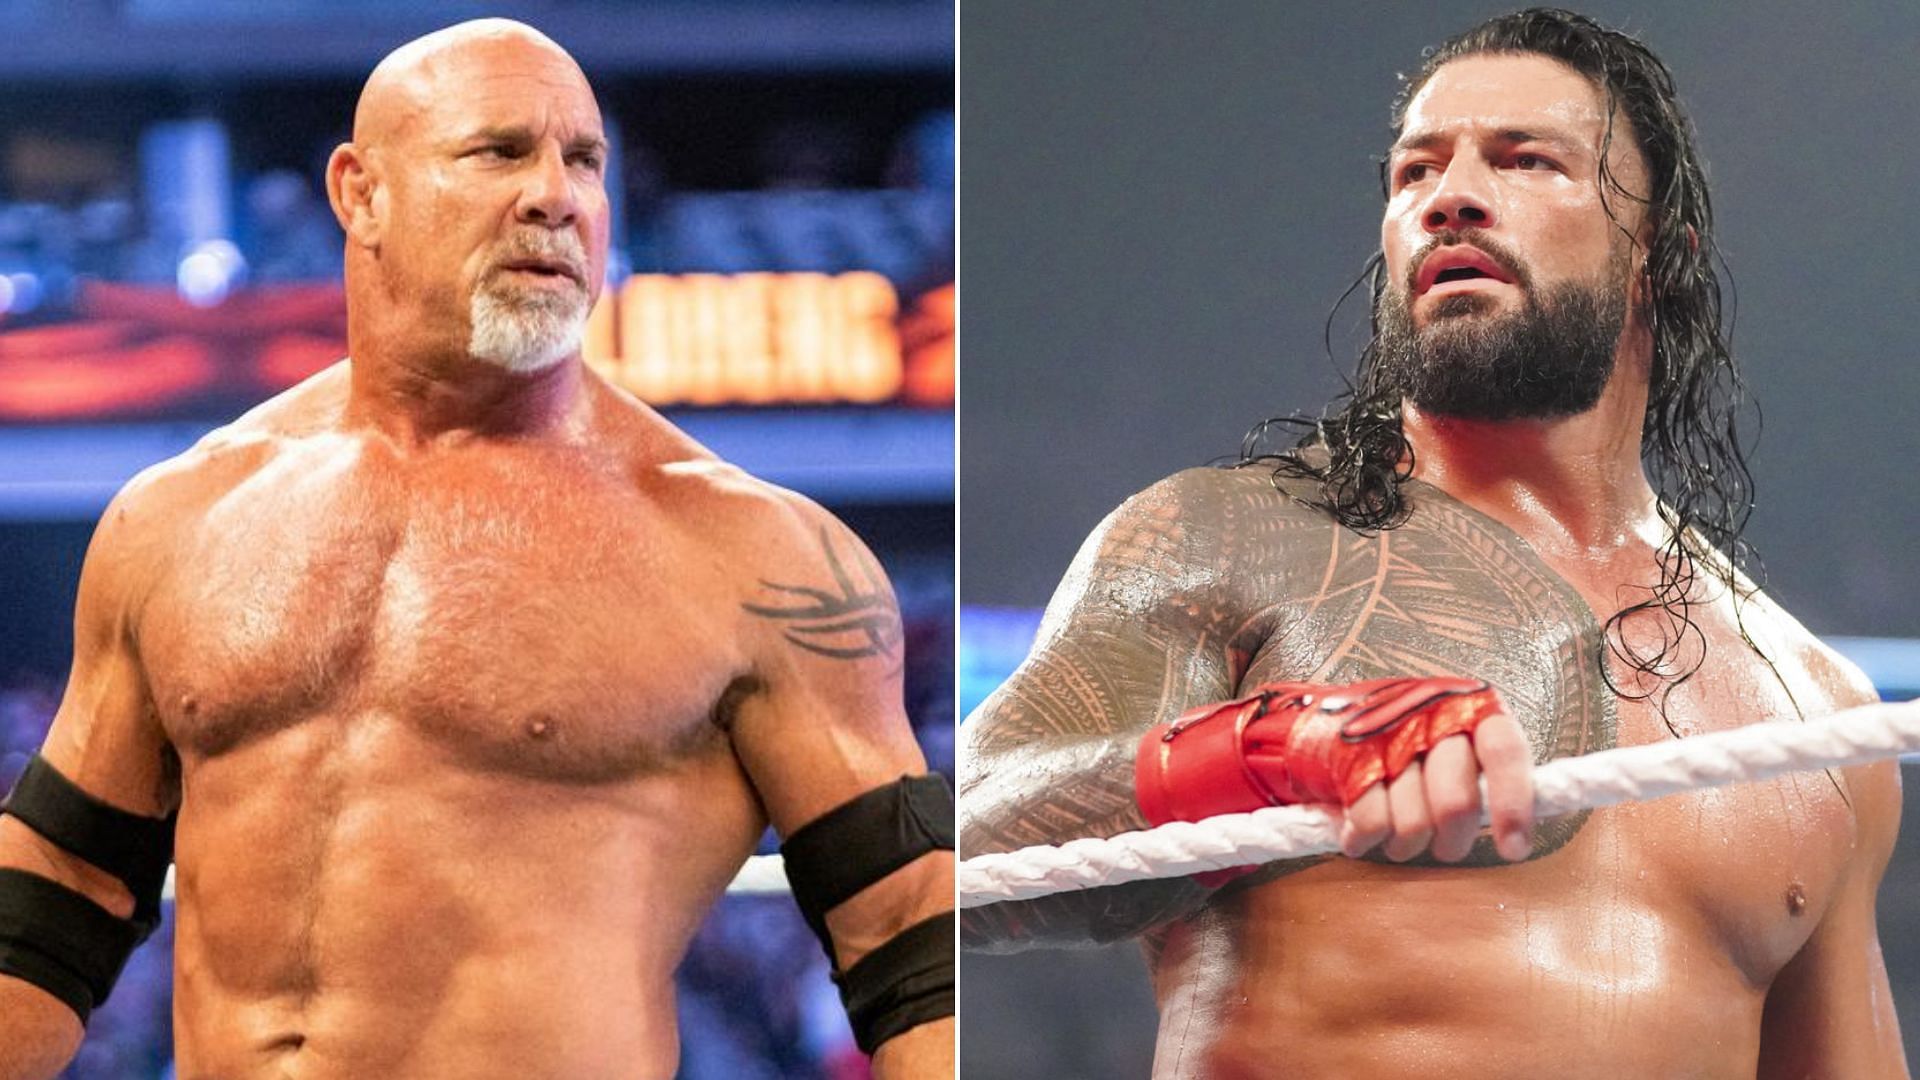 Goldberg and Roman Reigns were among the rumors at the end of August.